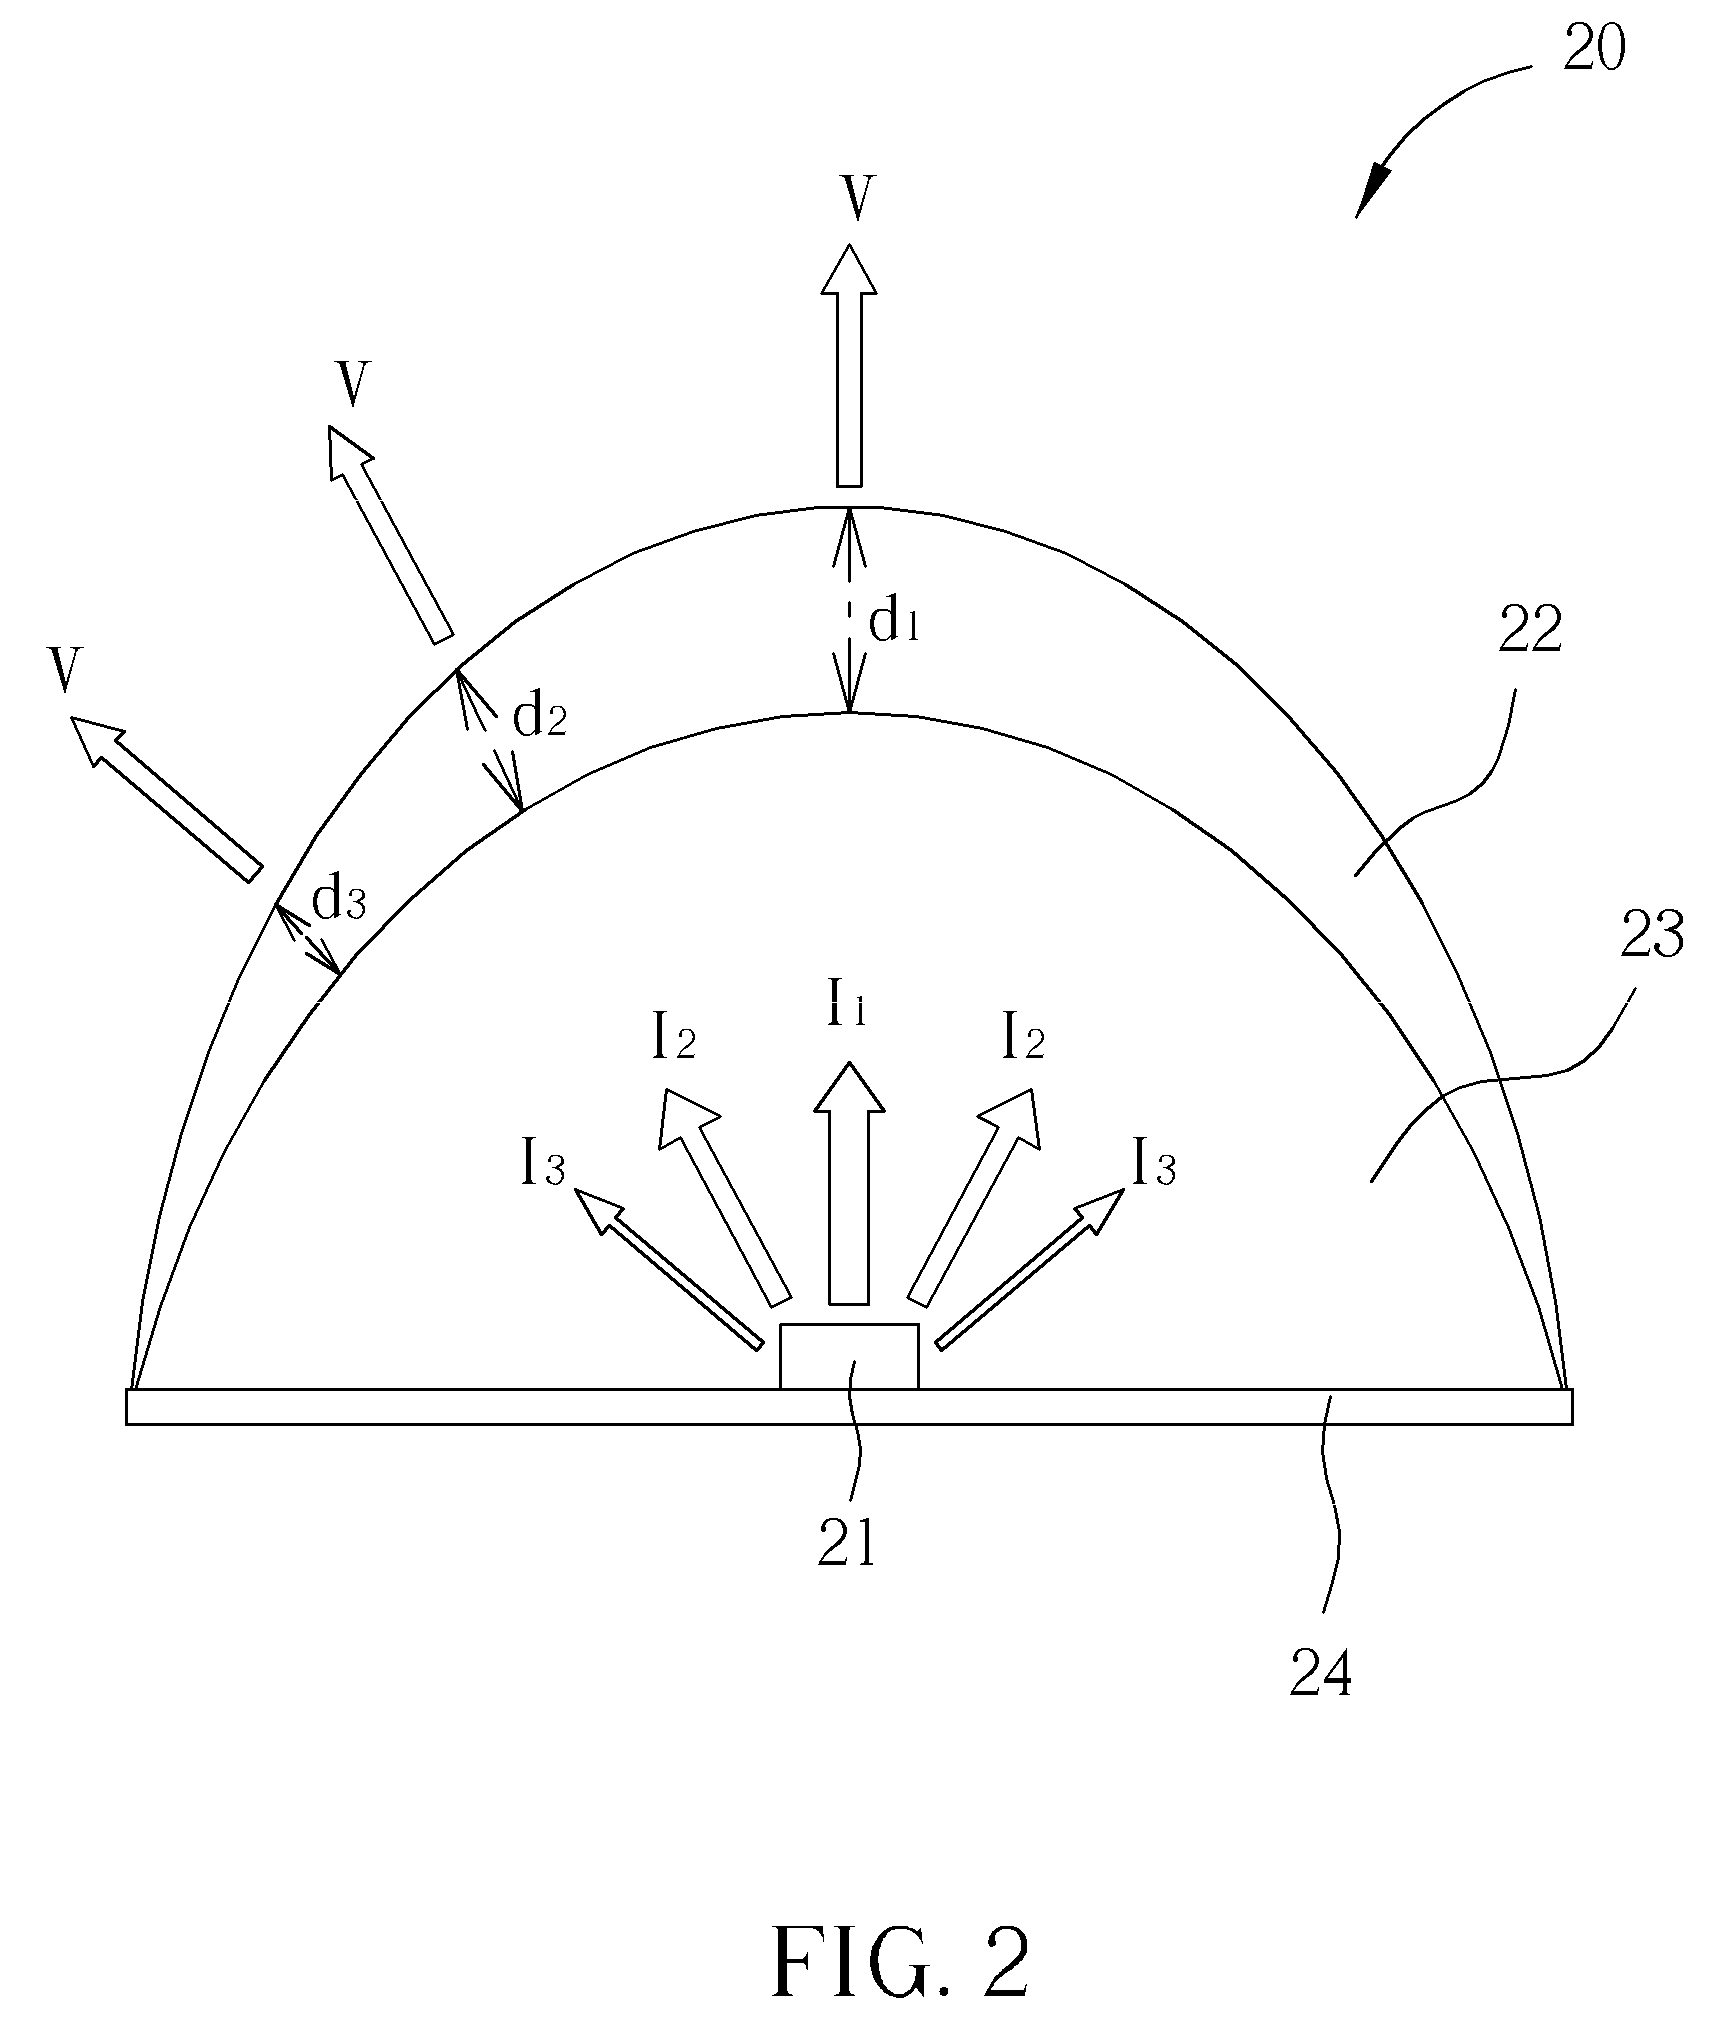 Photoelectric semiconductor device capable of generating uniform compound lights